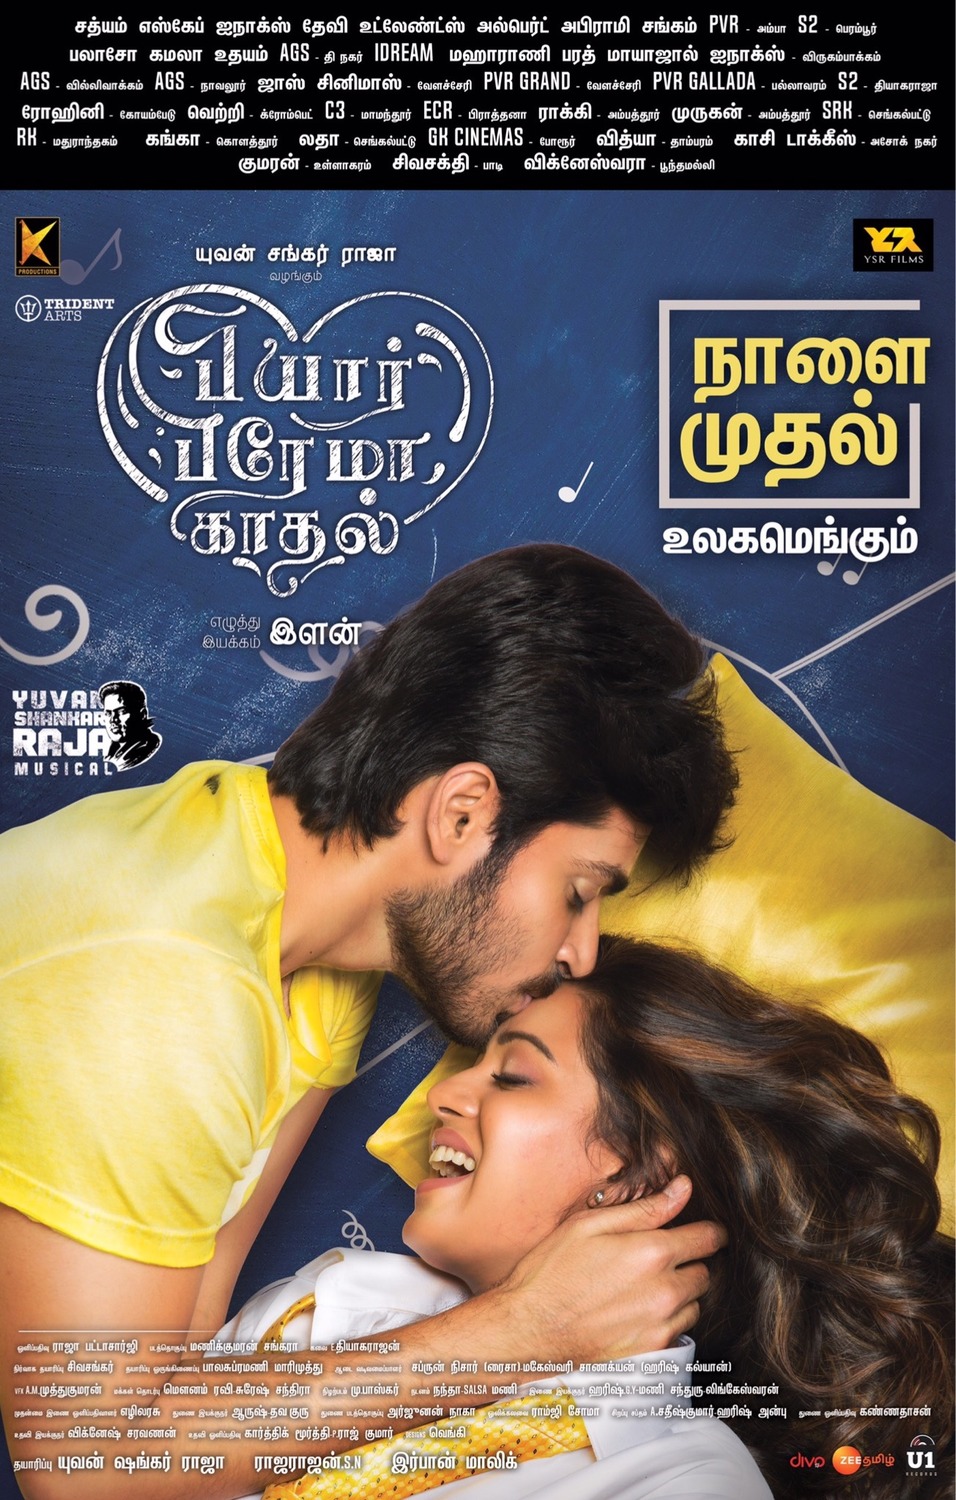 Extra Large Movie Poster Image for Pyaar Prema Kaadhal (#4 of 10)